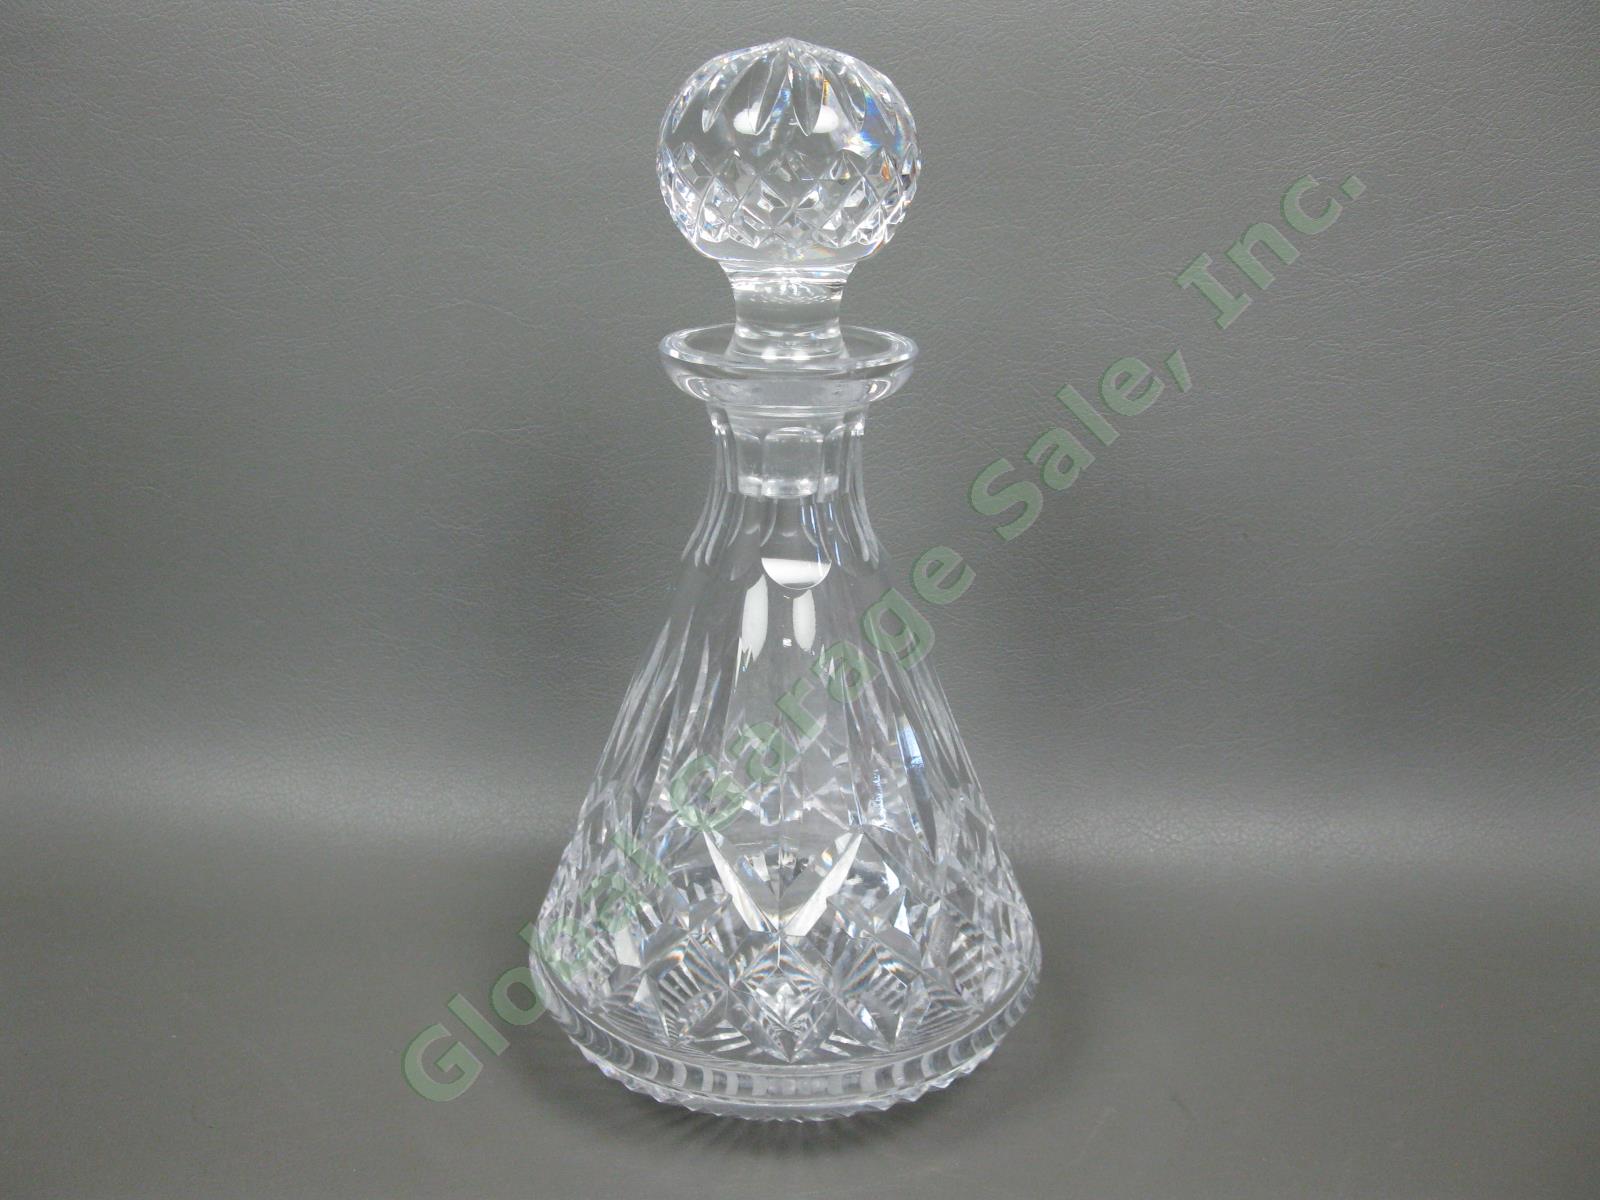 Vintage Waterford Crystal Lismore Roly Poly Old Fashioned Glass Liquor Decanter